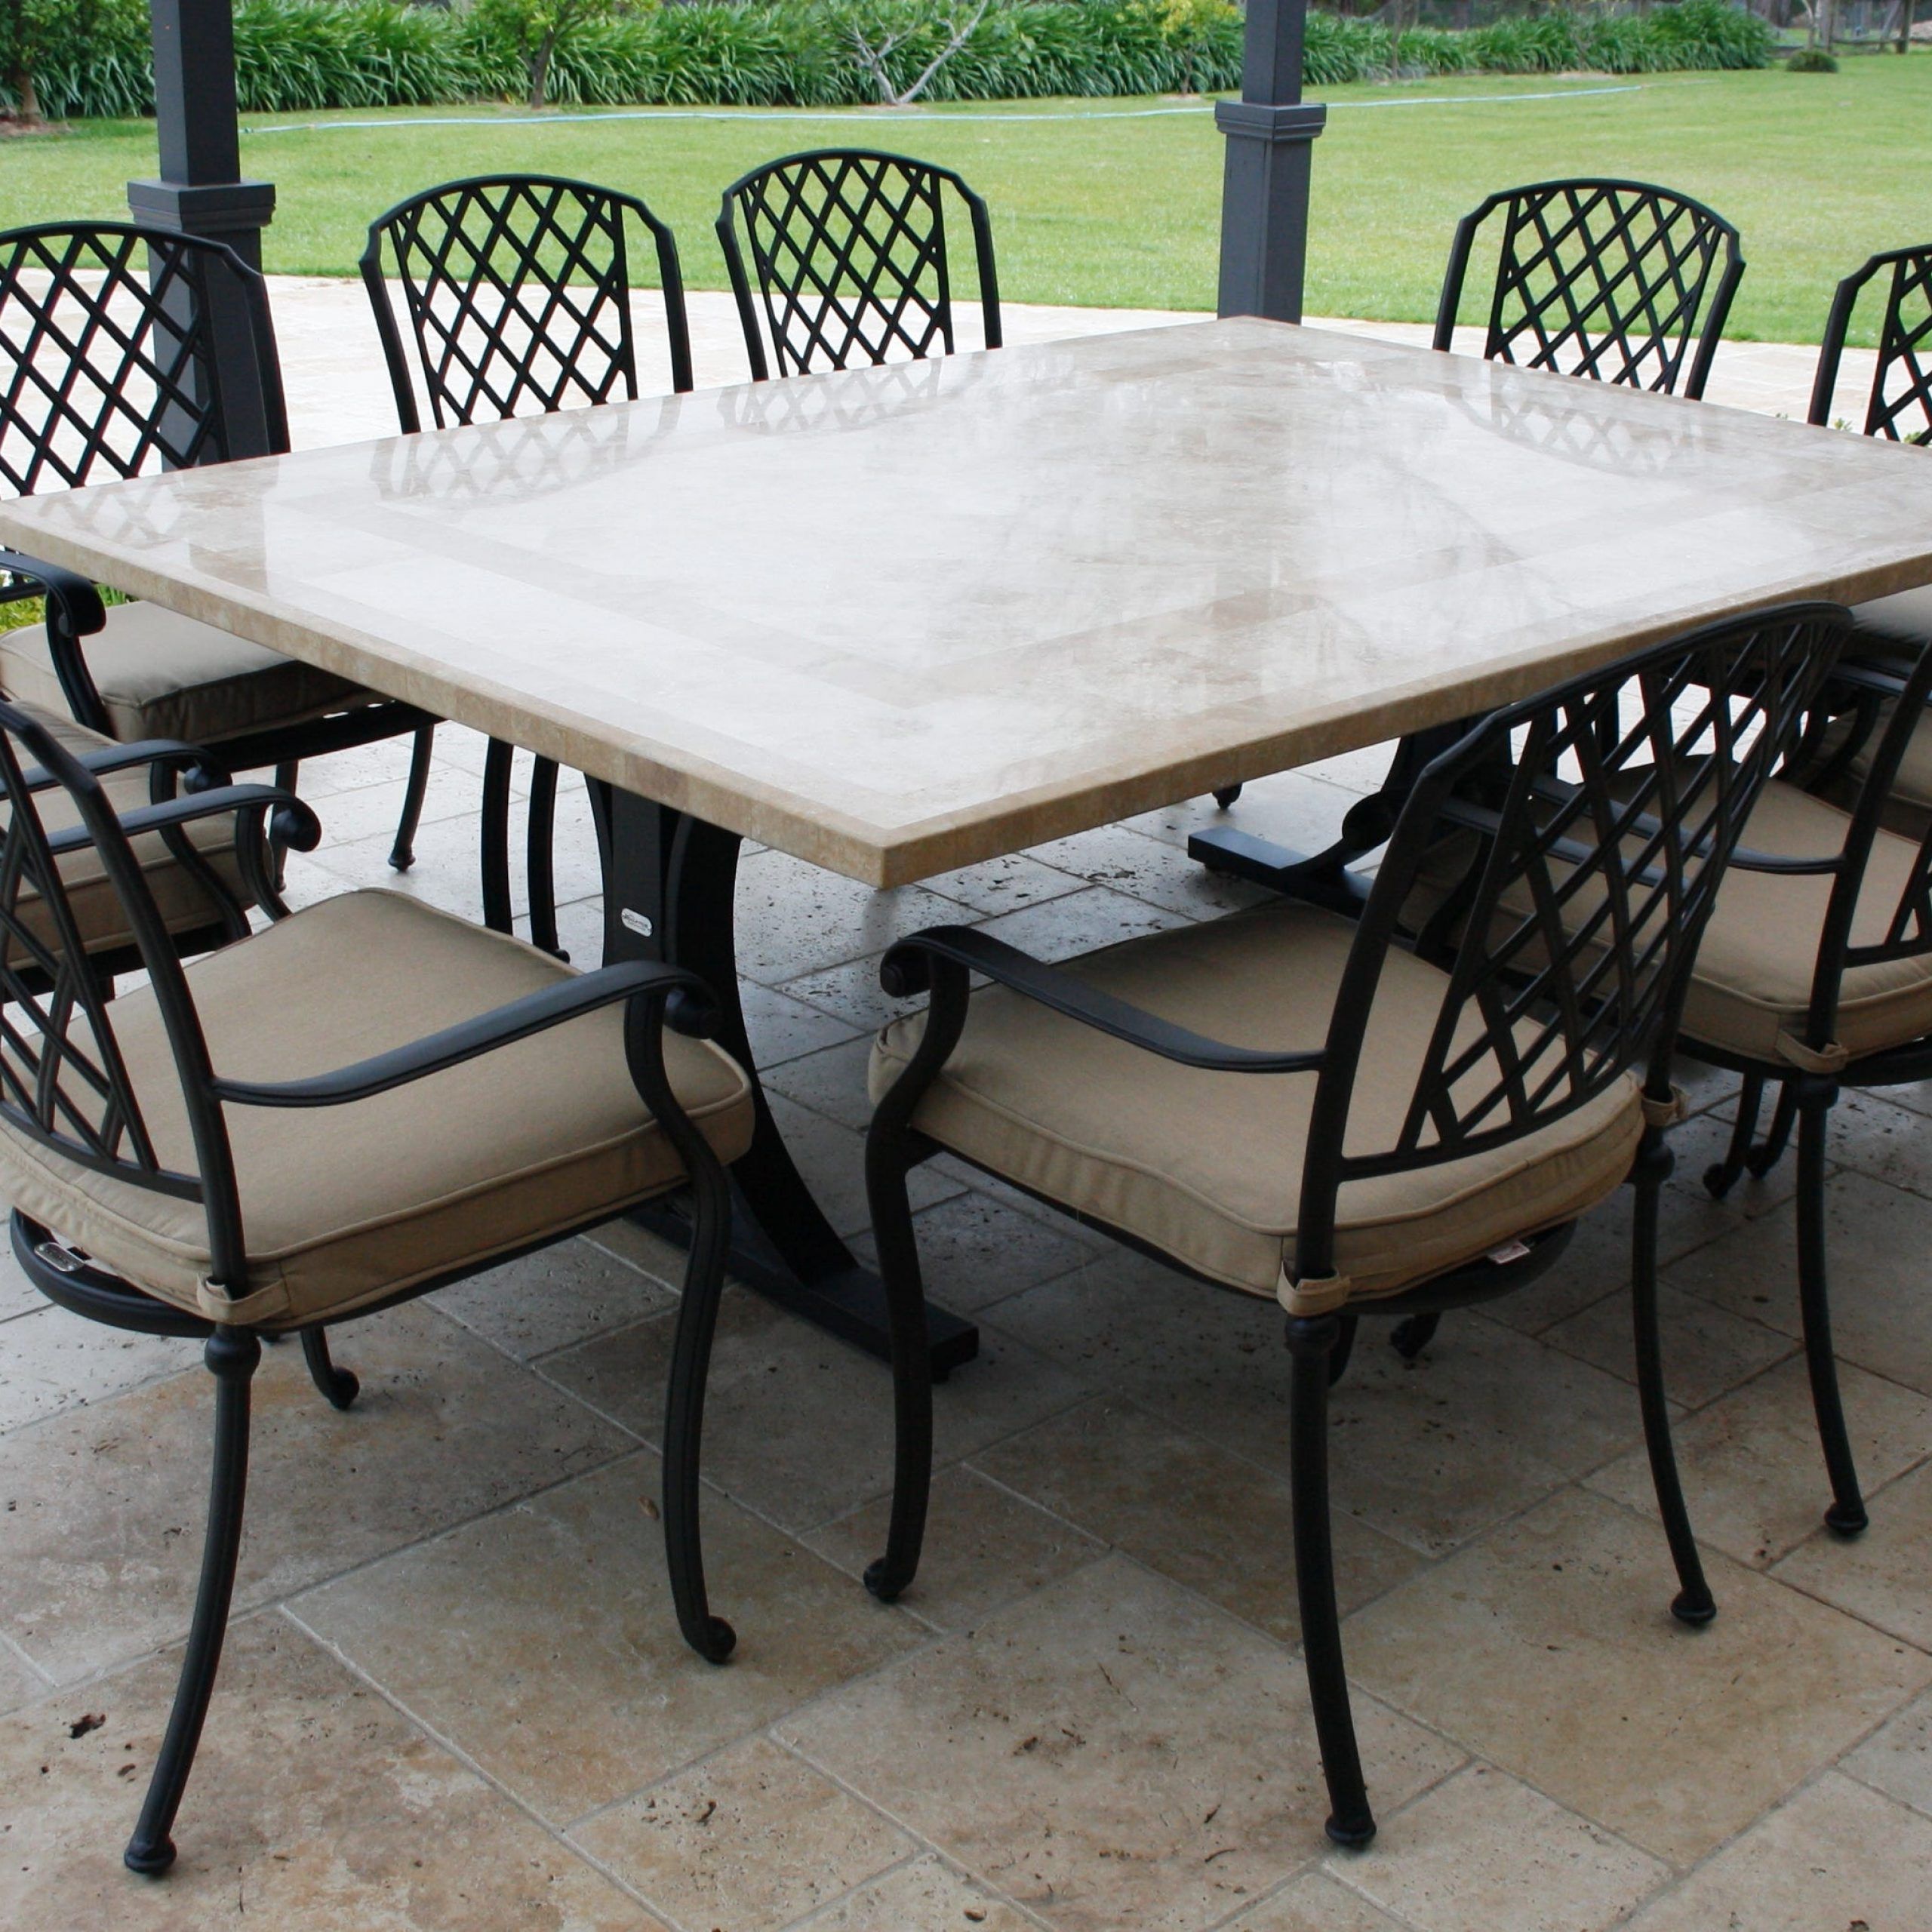 Marble Outdoor Tables Intended For Best And Newest Natural Stone Outdoor Tables (View 14 of 15)